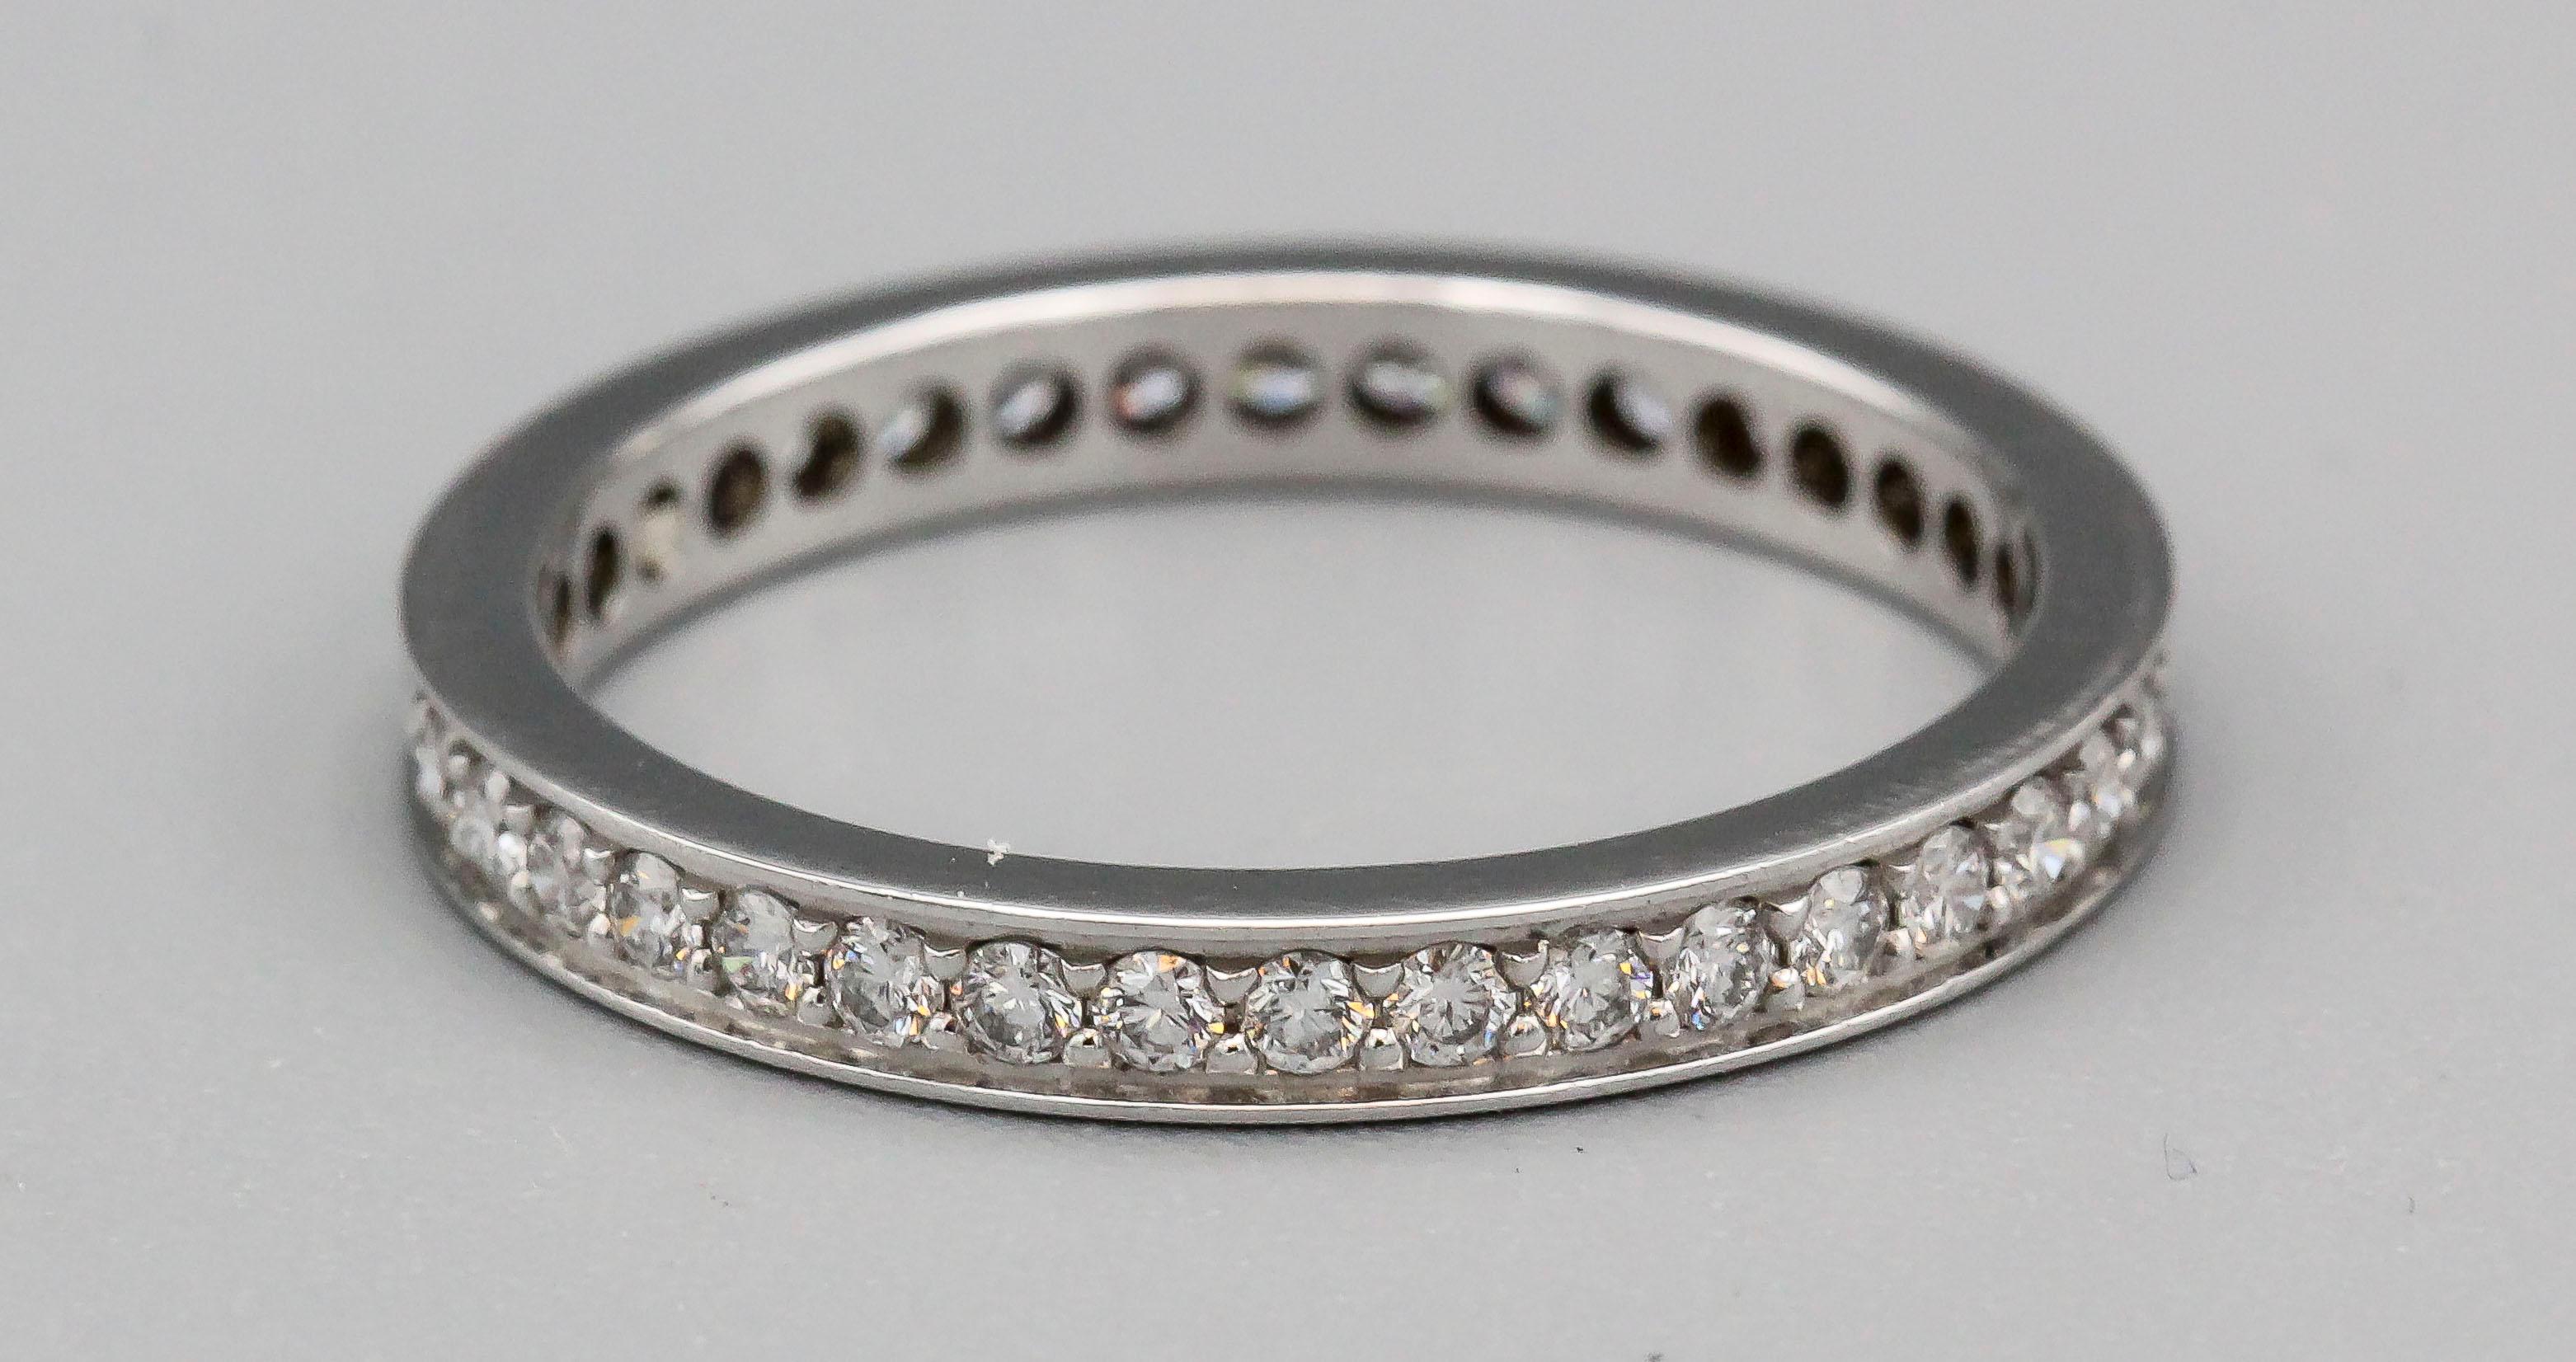 Fine diamond and platinum band by Cartier. It features high grade round brilliant cut diamonds of approx. .4 carats, measures 2.4 mm wide, and is currently retailing for $5500. Approx. size 5.25 (European size 50)

Hallmarks: Cartier, Pt950, 50,